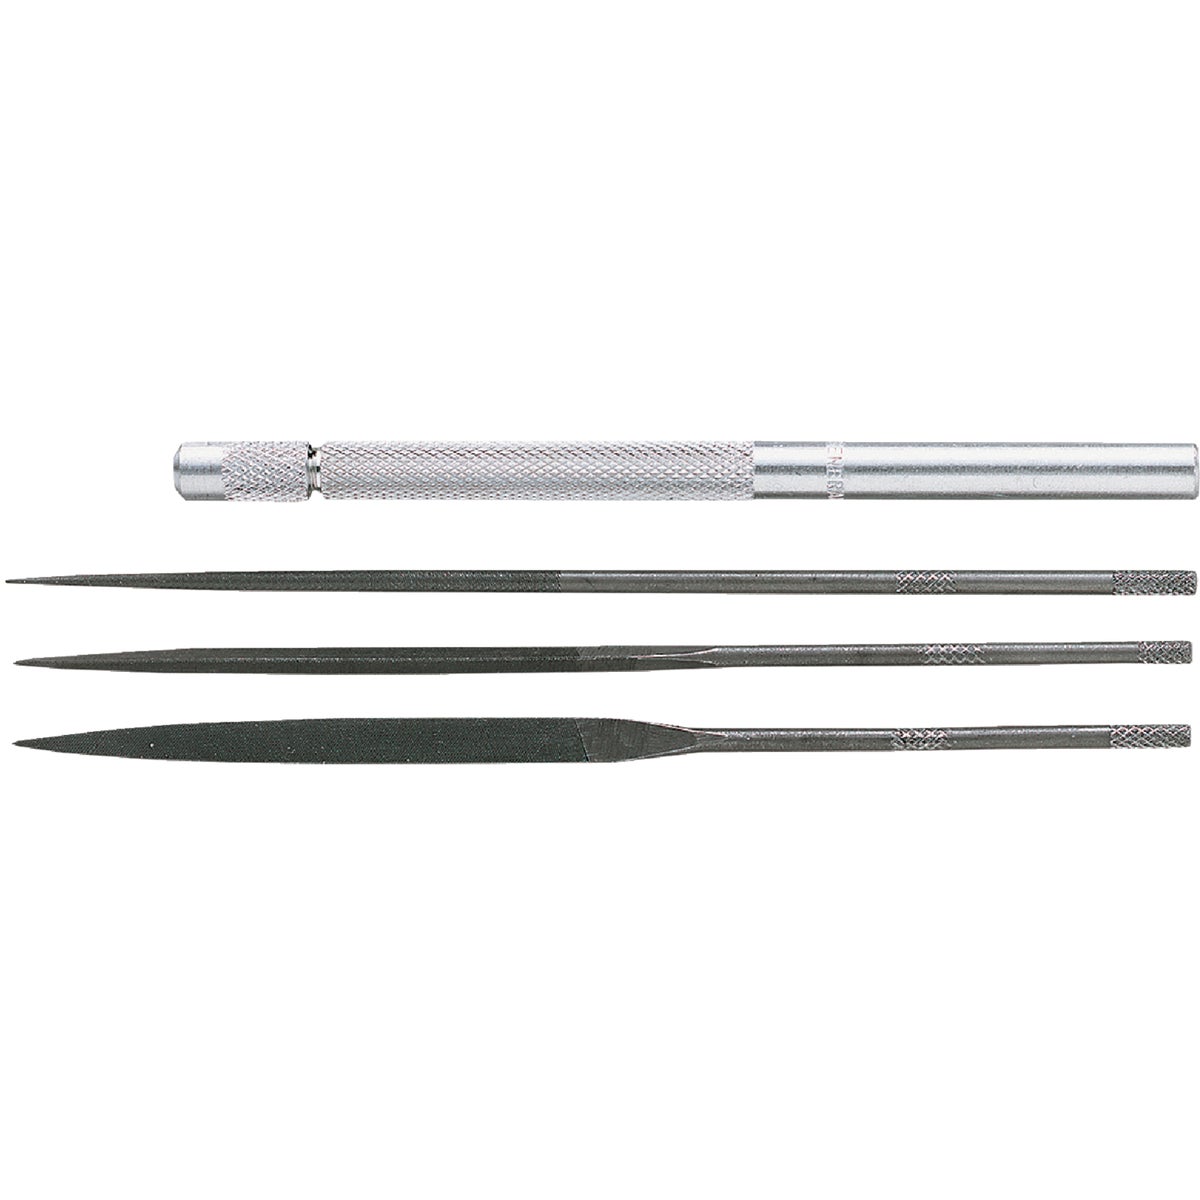 Item 320412, A 4-piece set designed for exacting requirements of tool and die makers, 